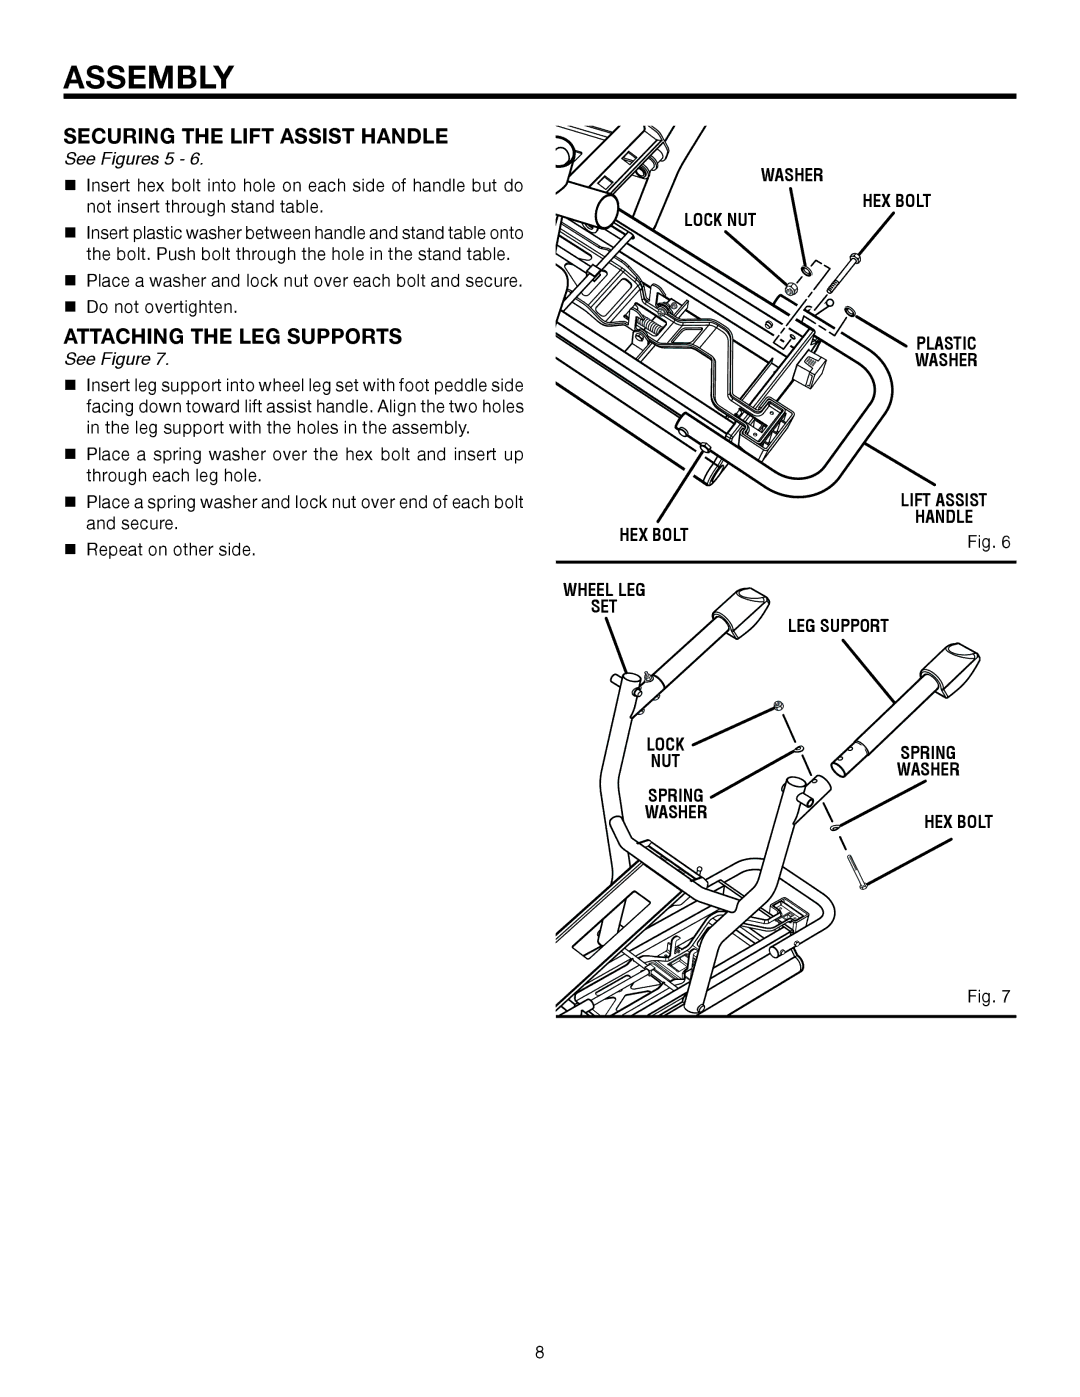 RIDGID AC9944 manual Securing the Lift Assist Handle, Attaching the LEG Supports, See Figures 5 